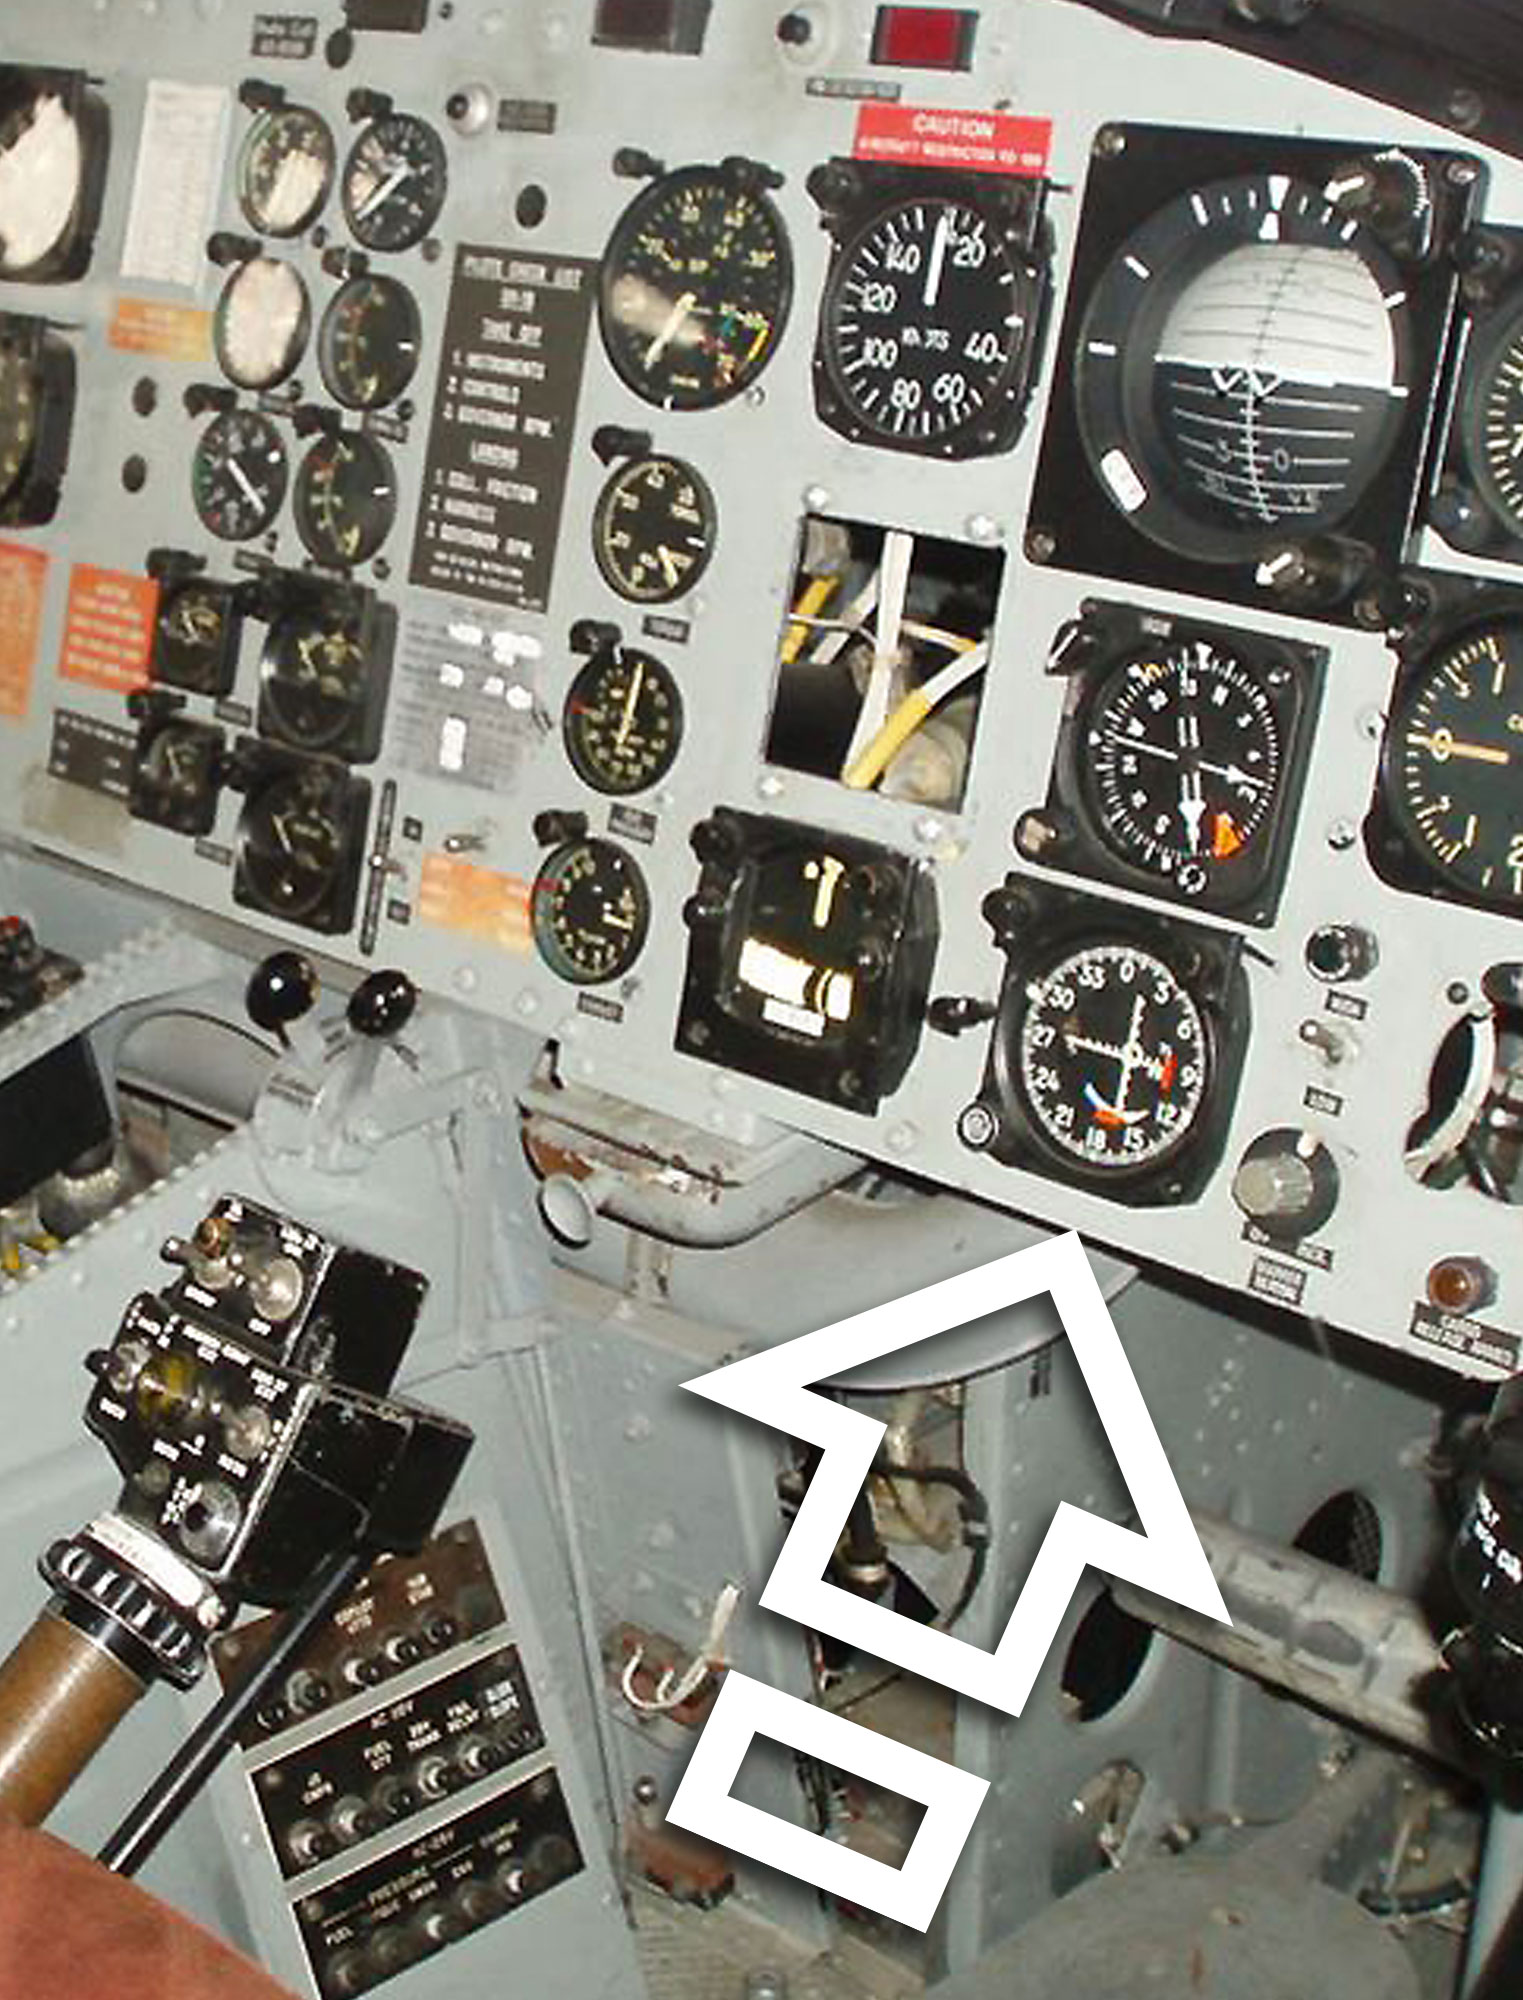 BELL UH-1 & UH-1C GUNSHIP HUEY HELICOPTER COURSE DEVIATION INDICATOR